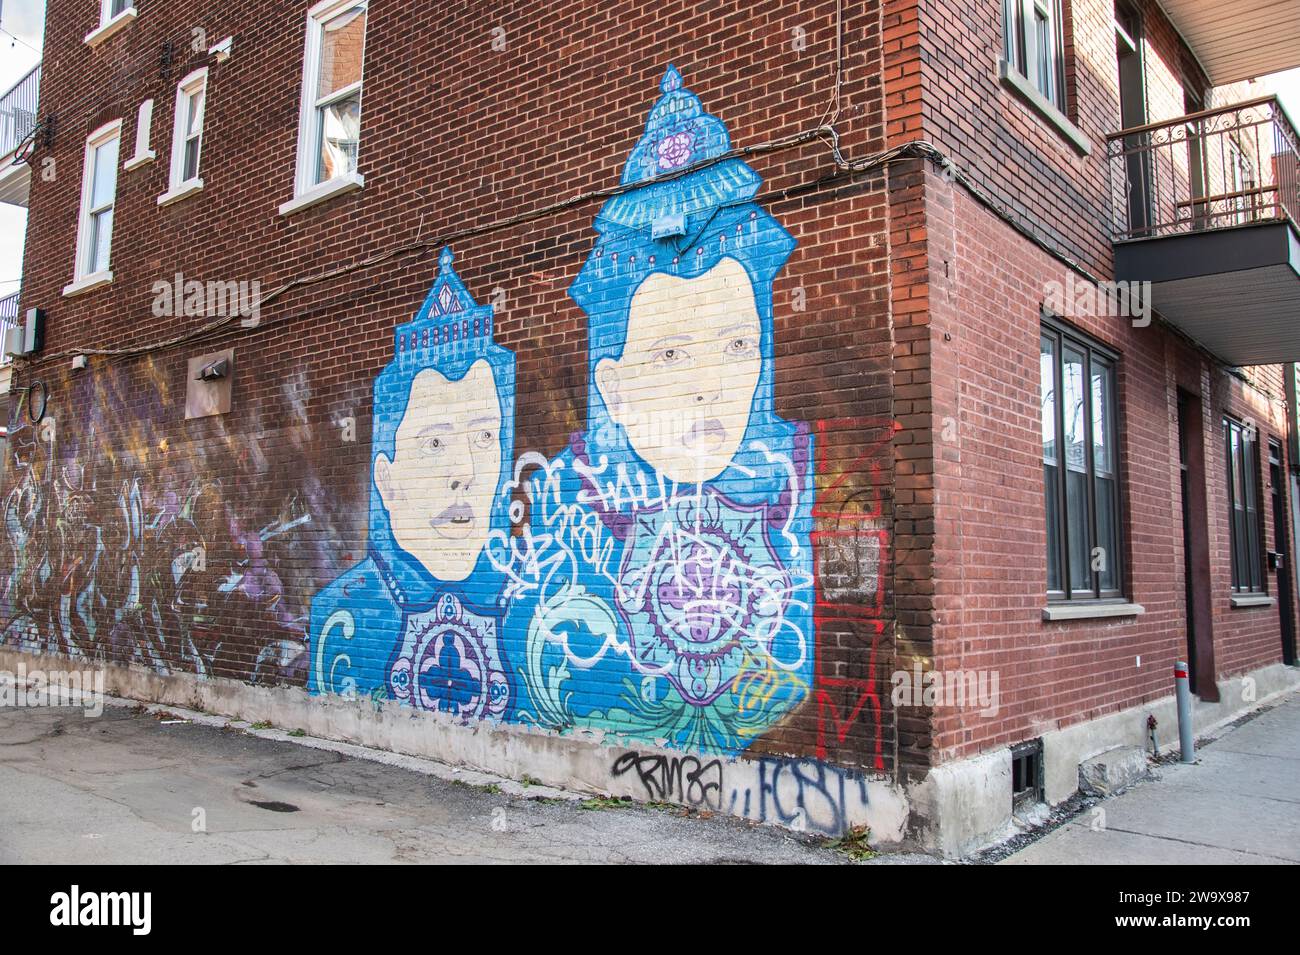 Central Asian prince and princess mural in Hochelaga neighborhood in Montreal, Quebec, Canada Stock Photo